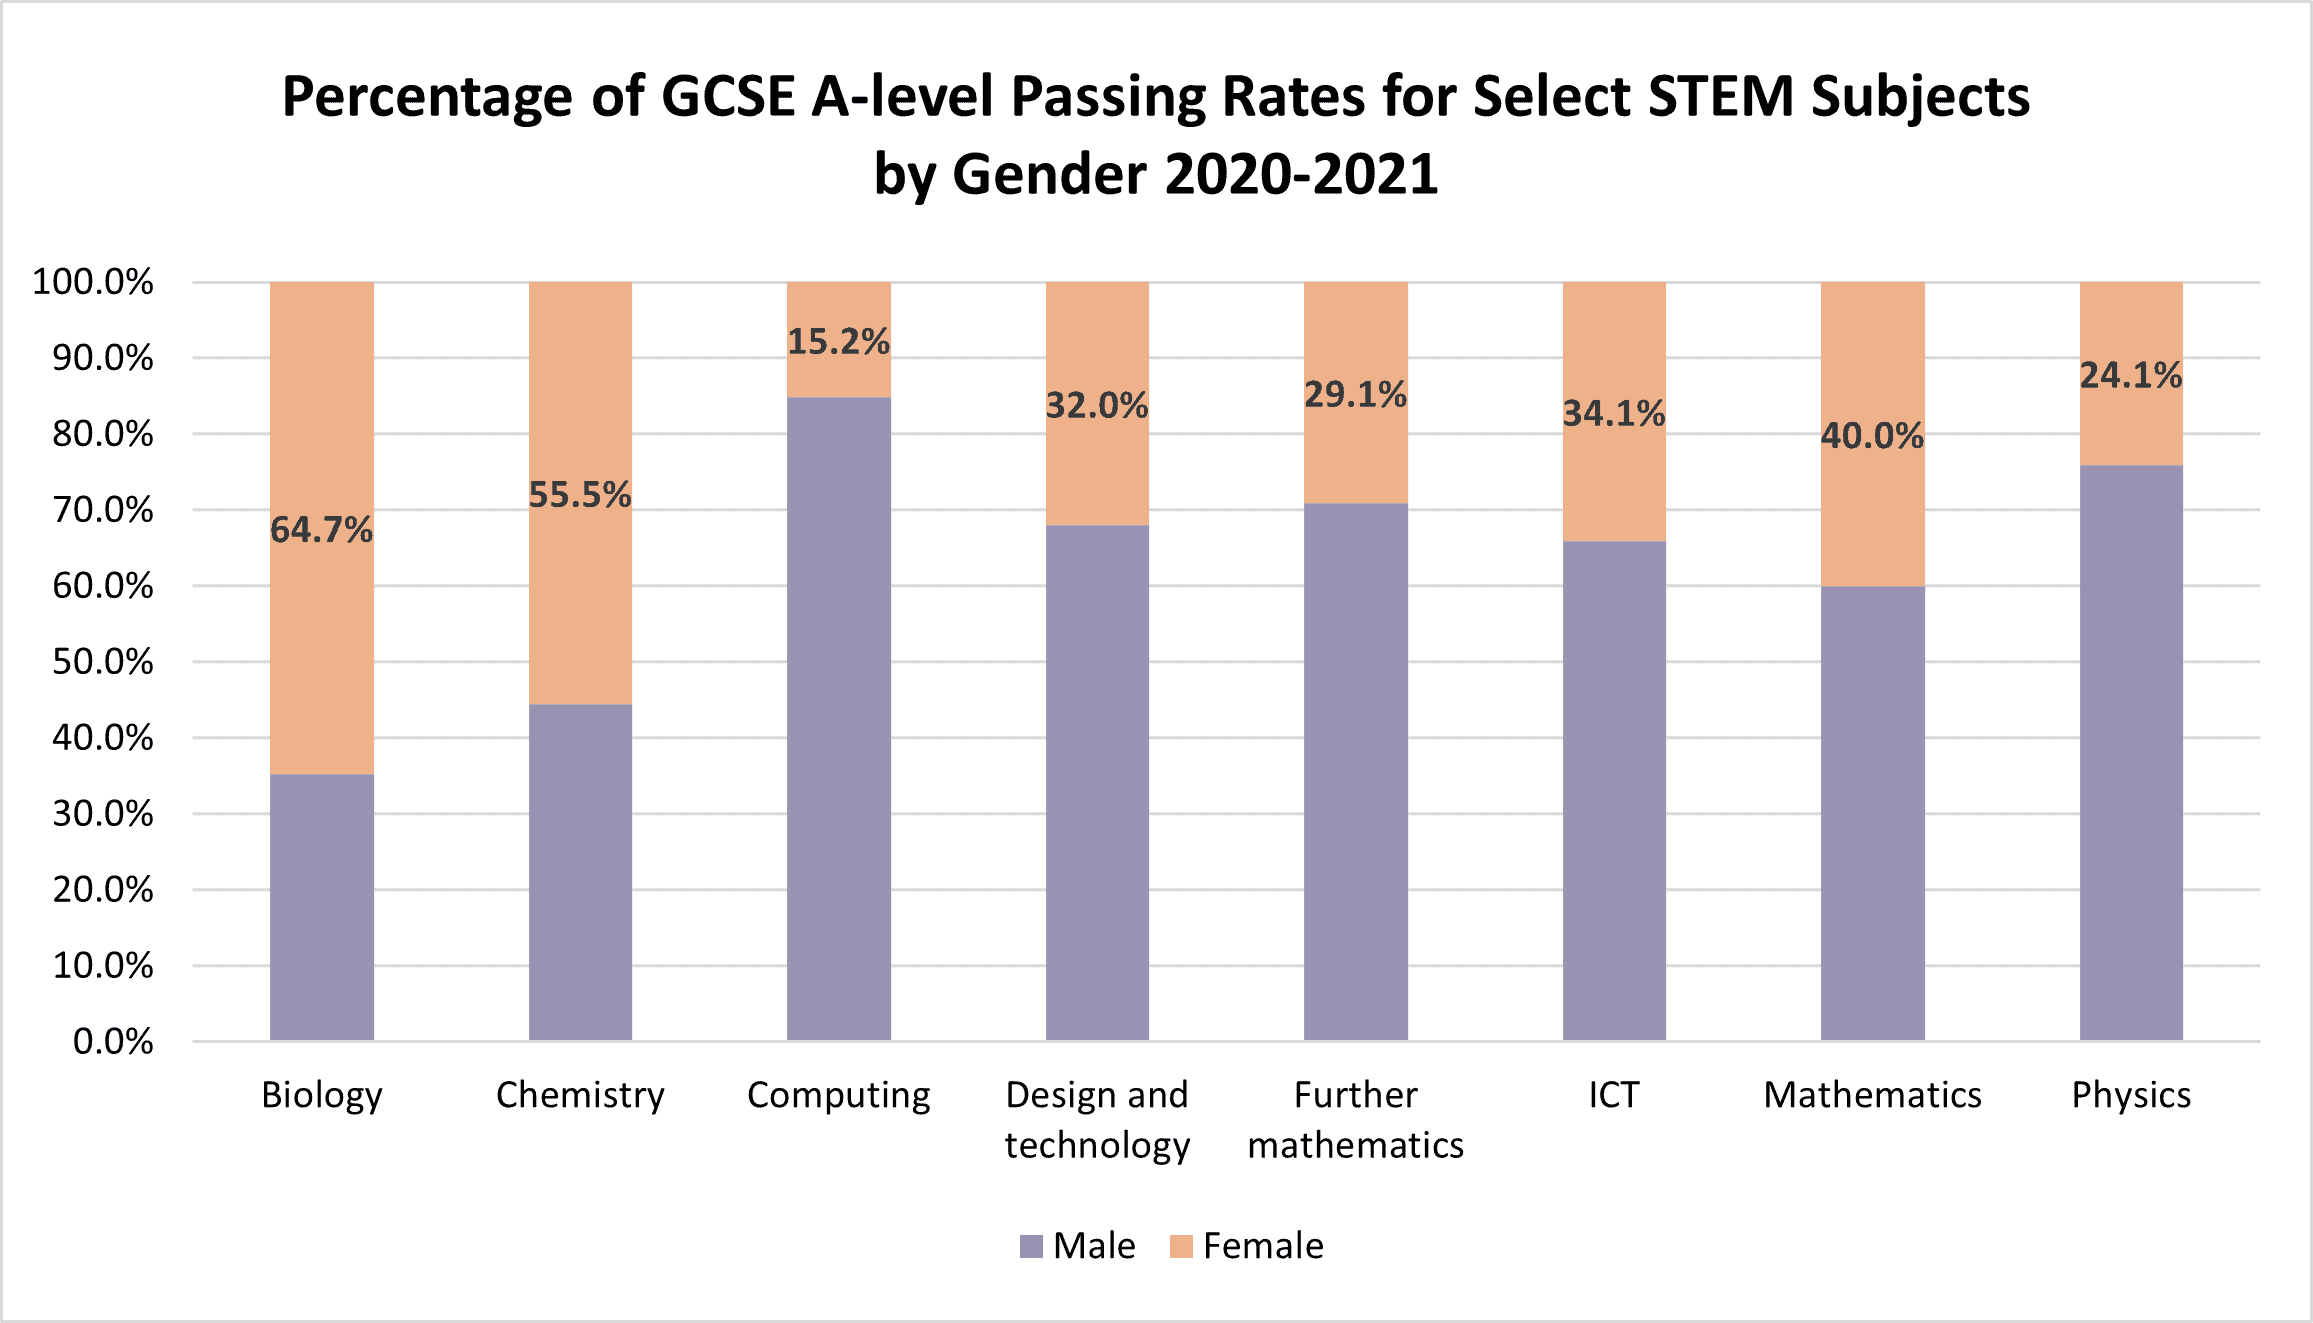 Percentage of GCSE A-level Passing Rates for Select STEM Subjects by Gender 2020-2021